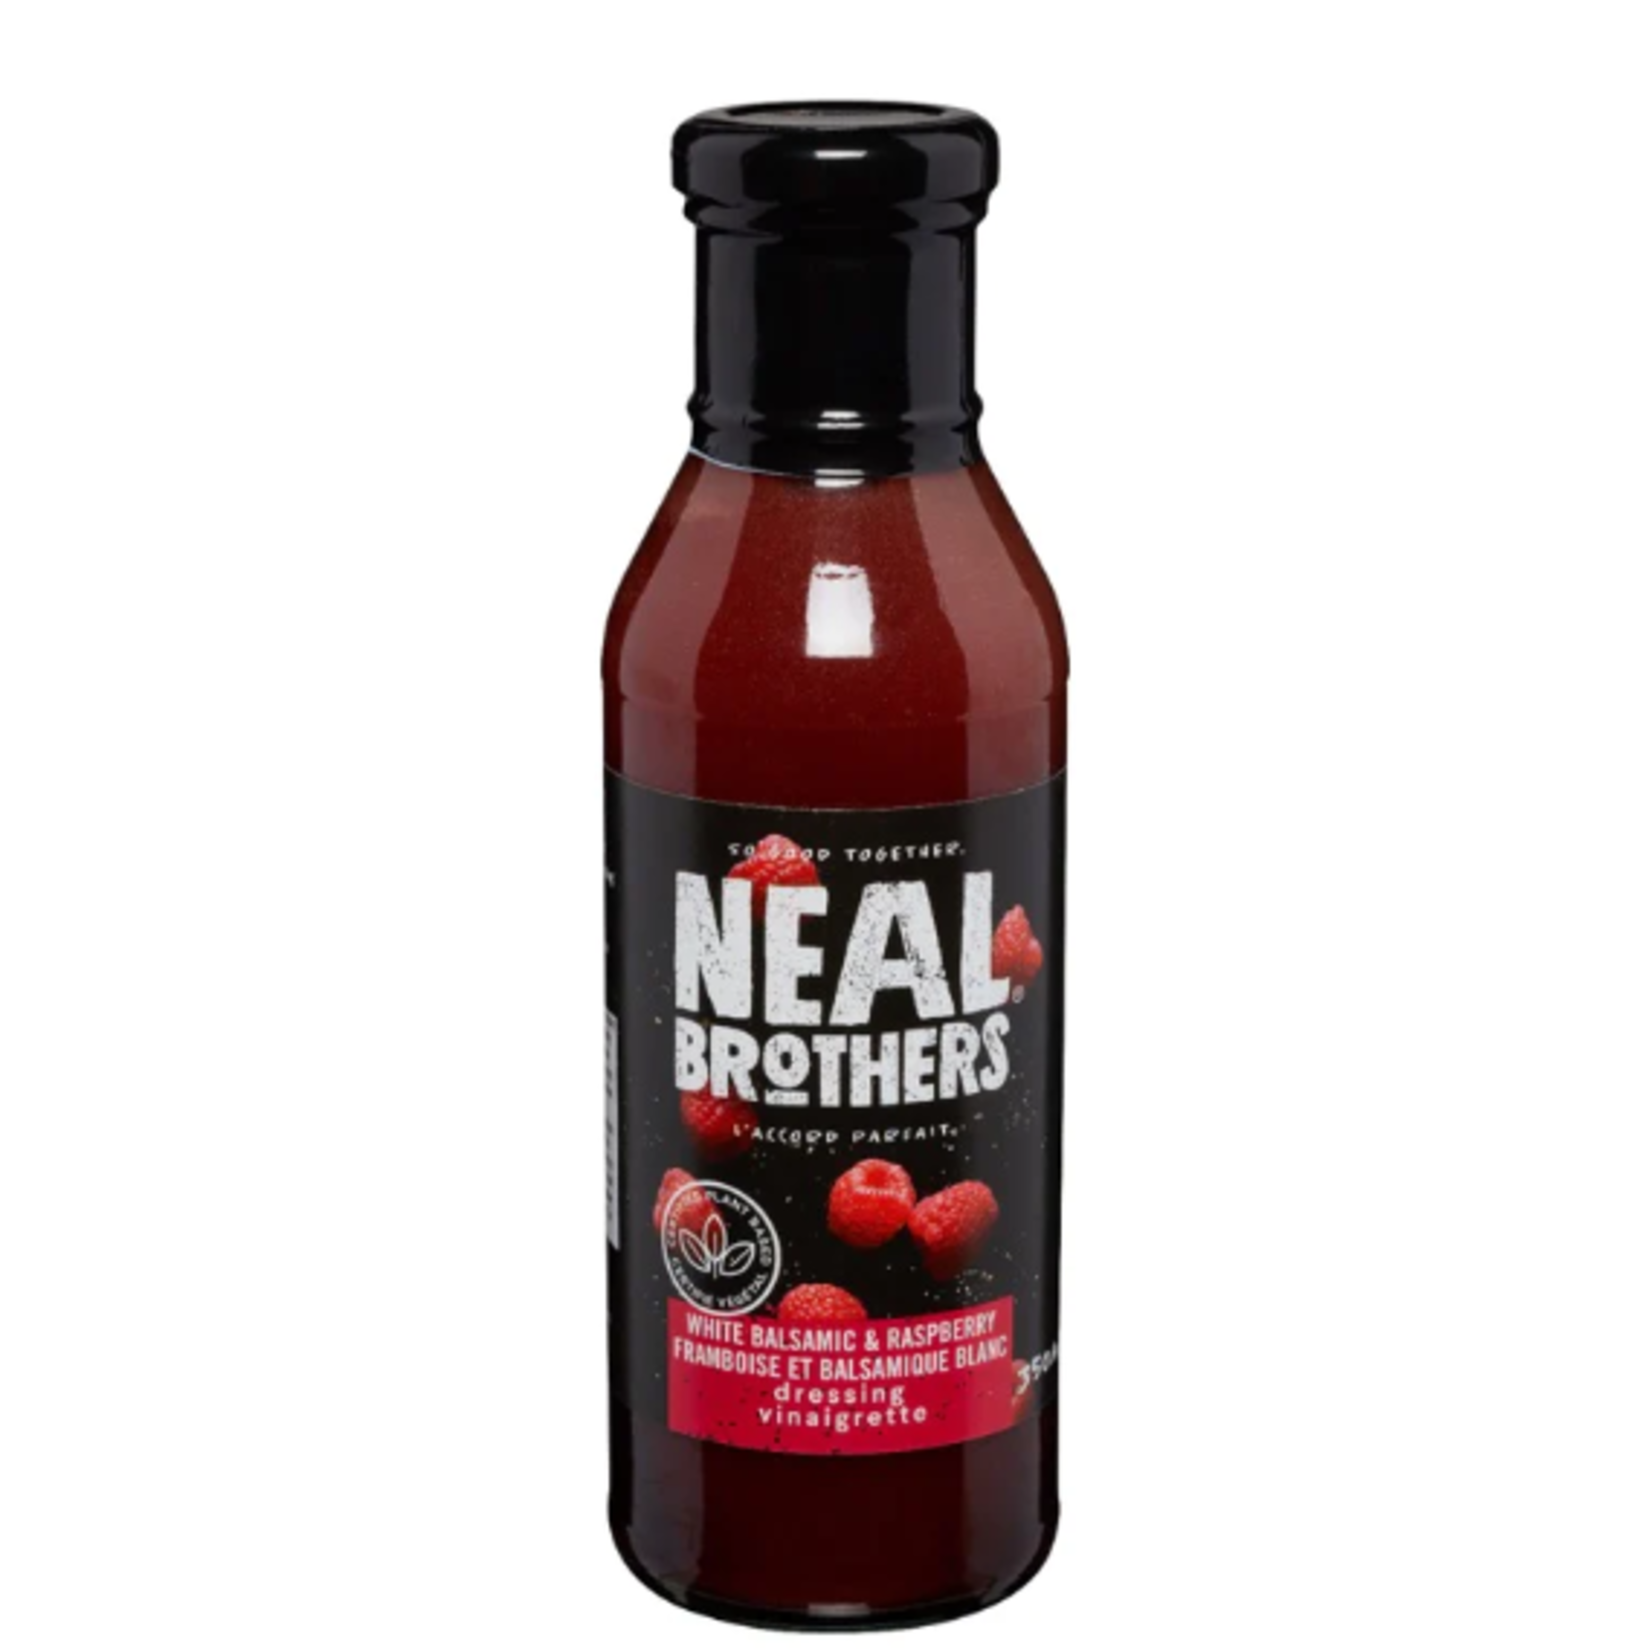 NEAL BROTHERS NEAL BROTHERS WHITE BALSAMIC